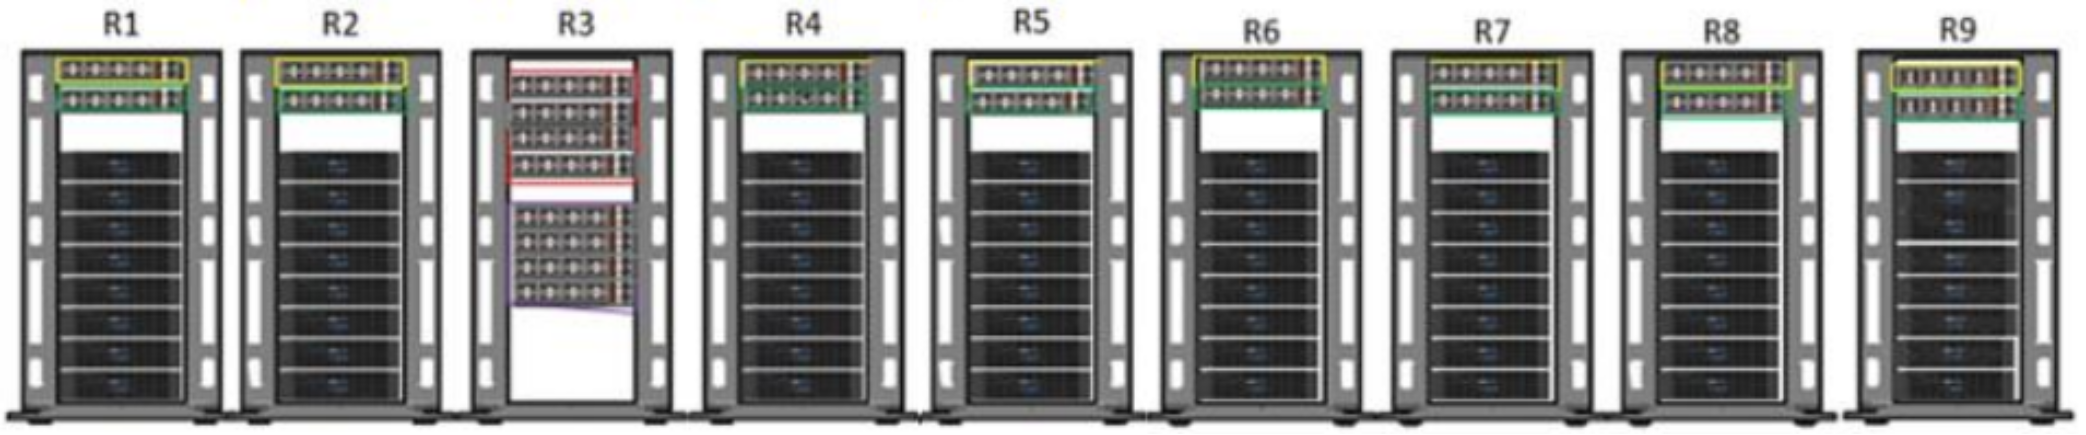 Graphic showing a nine rack large cluster design schematic. Rack three is dedicated to the network distribution switch infrastructure, while the other eight  contain cluster nodes and top of rack access switches.